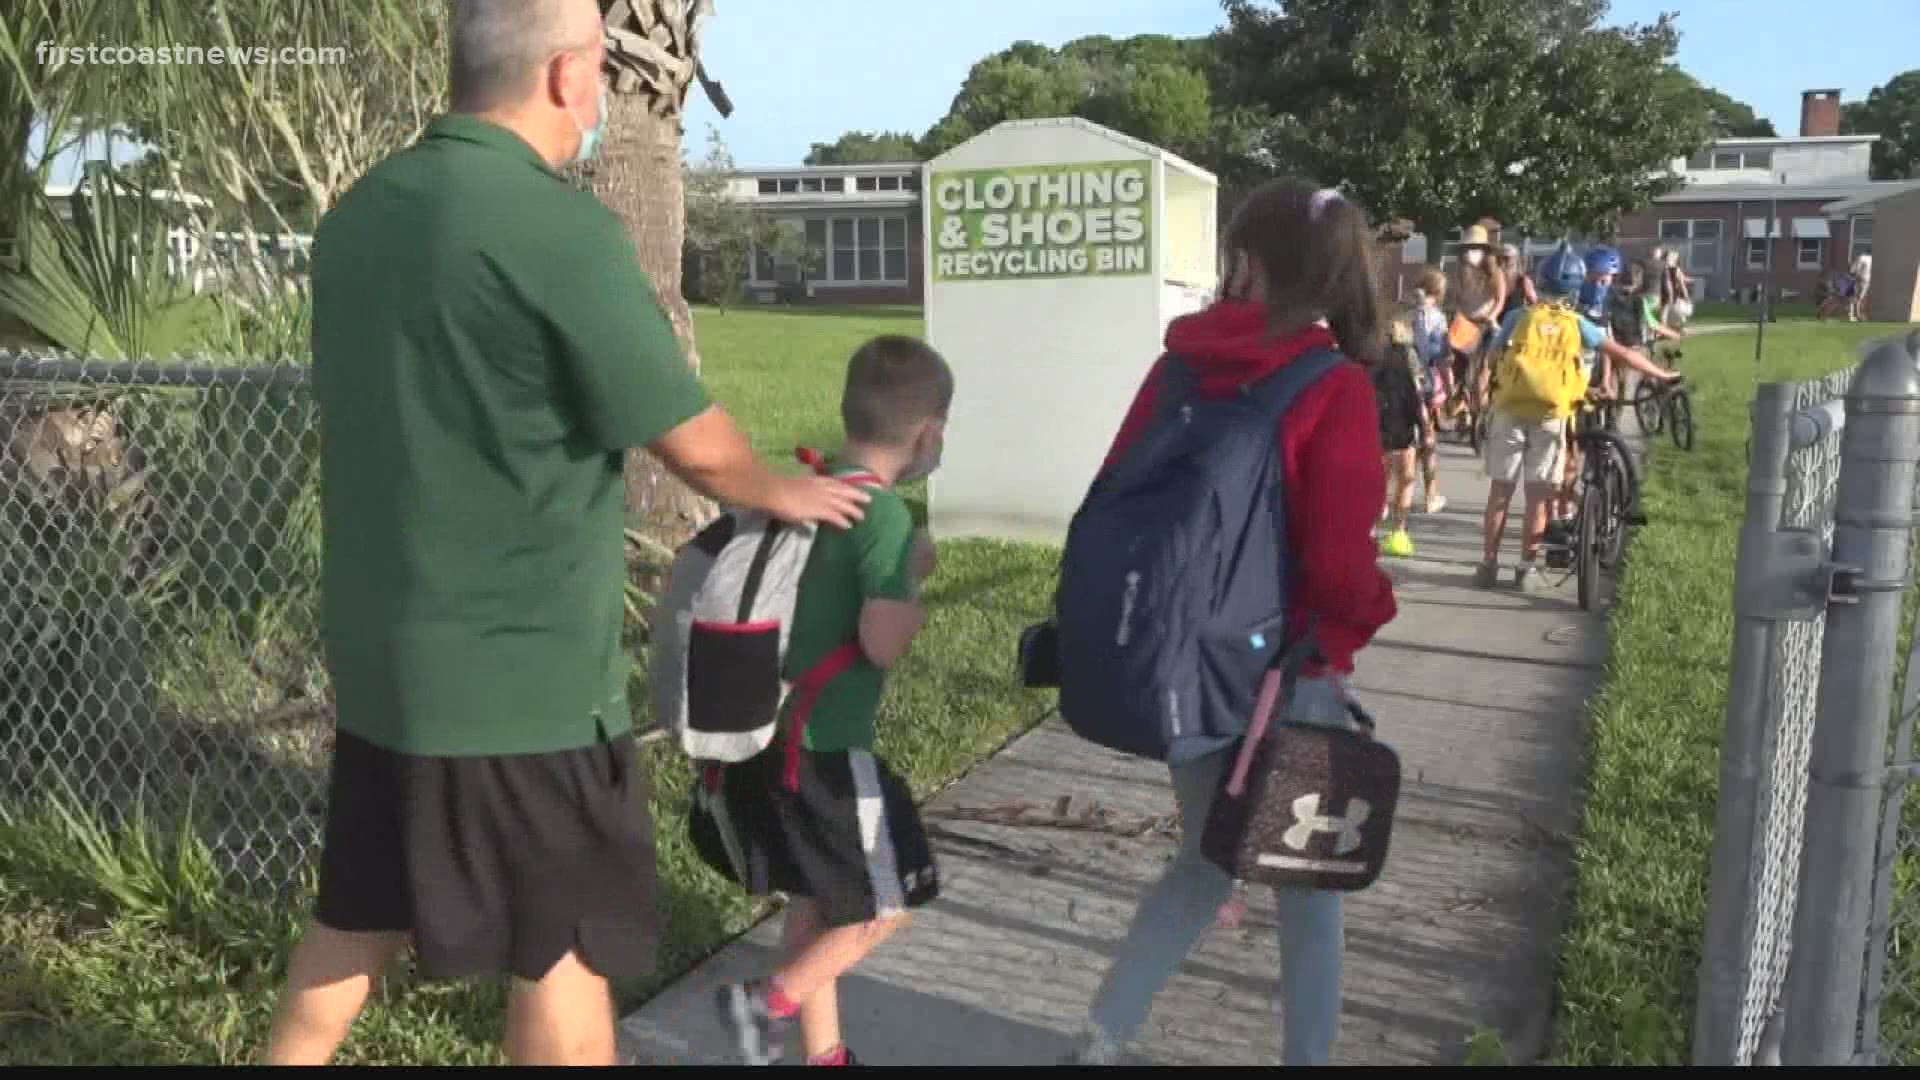 Thursday was the first day of classes for Duval County Public Schools.